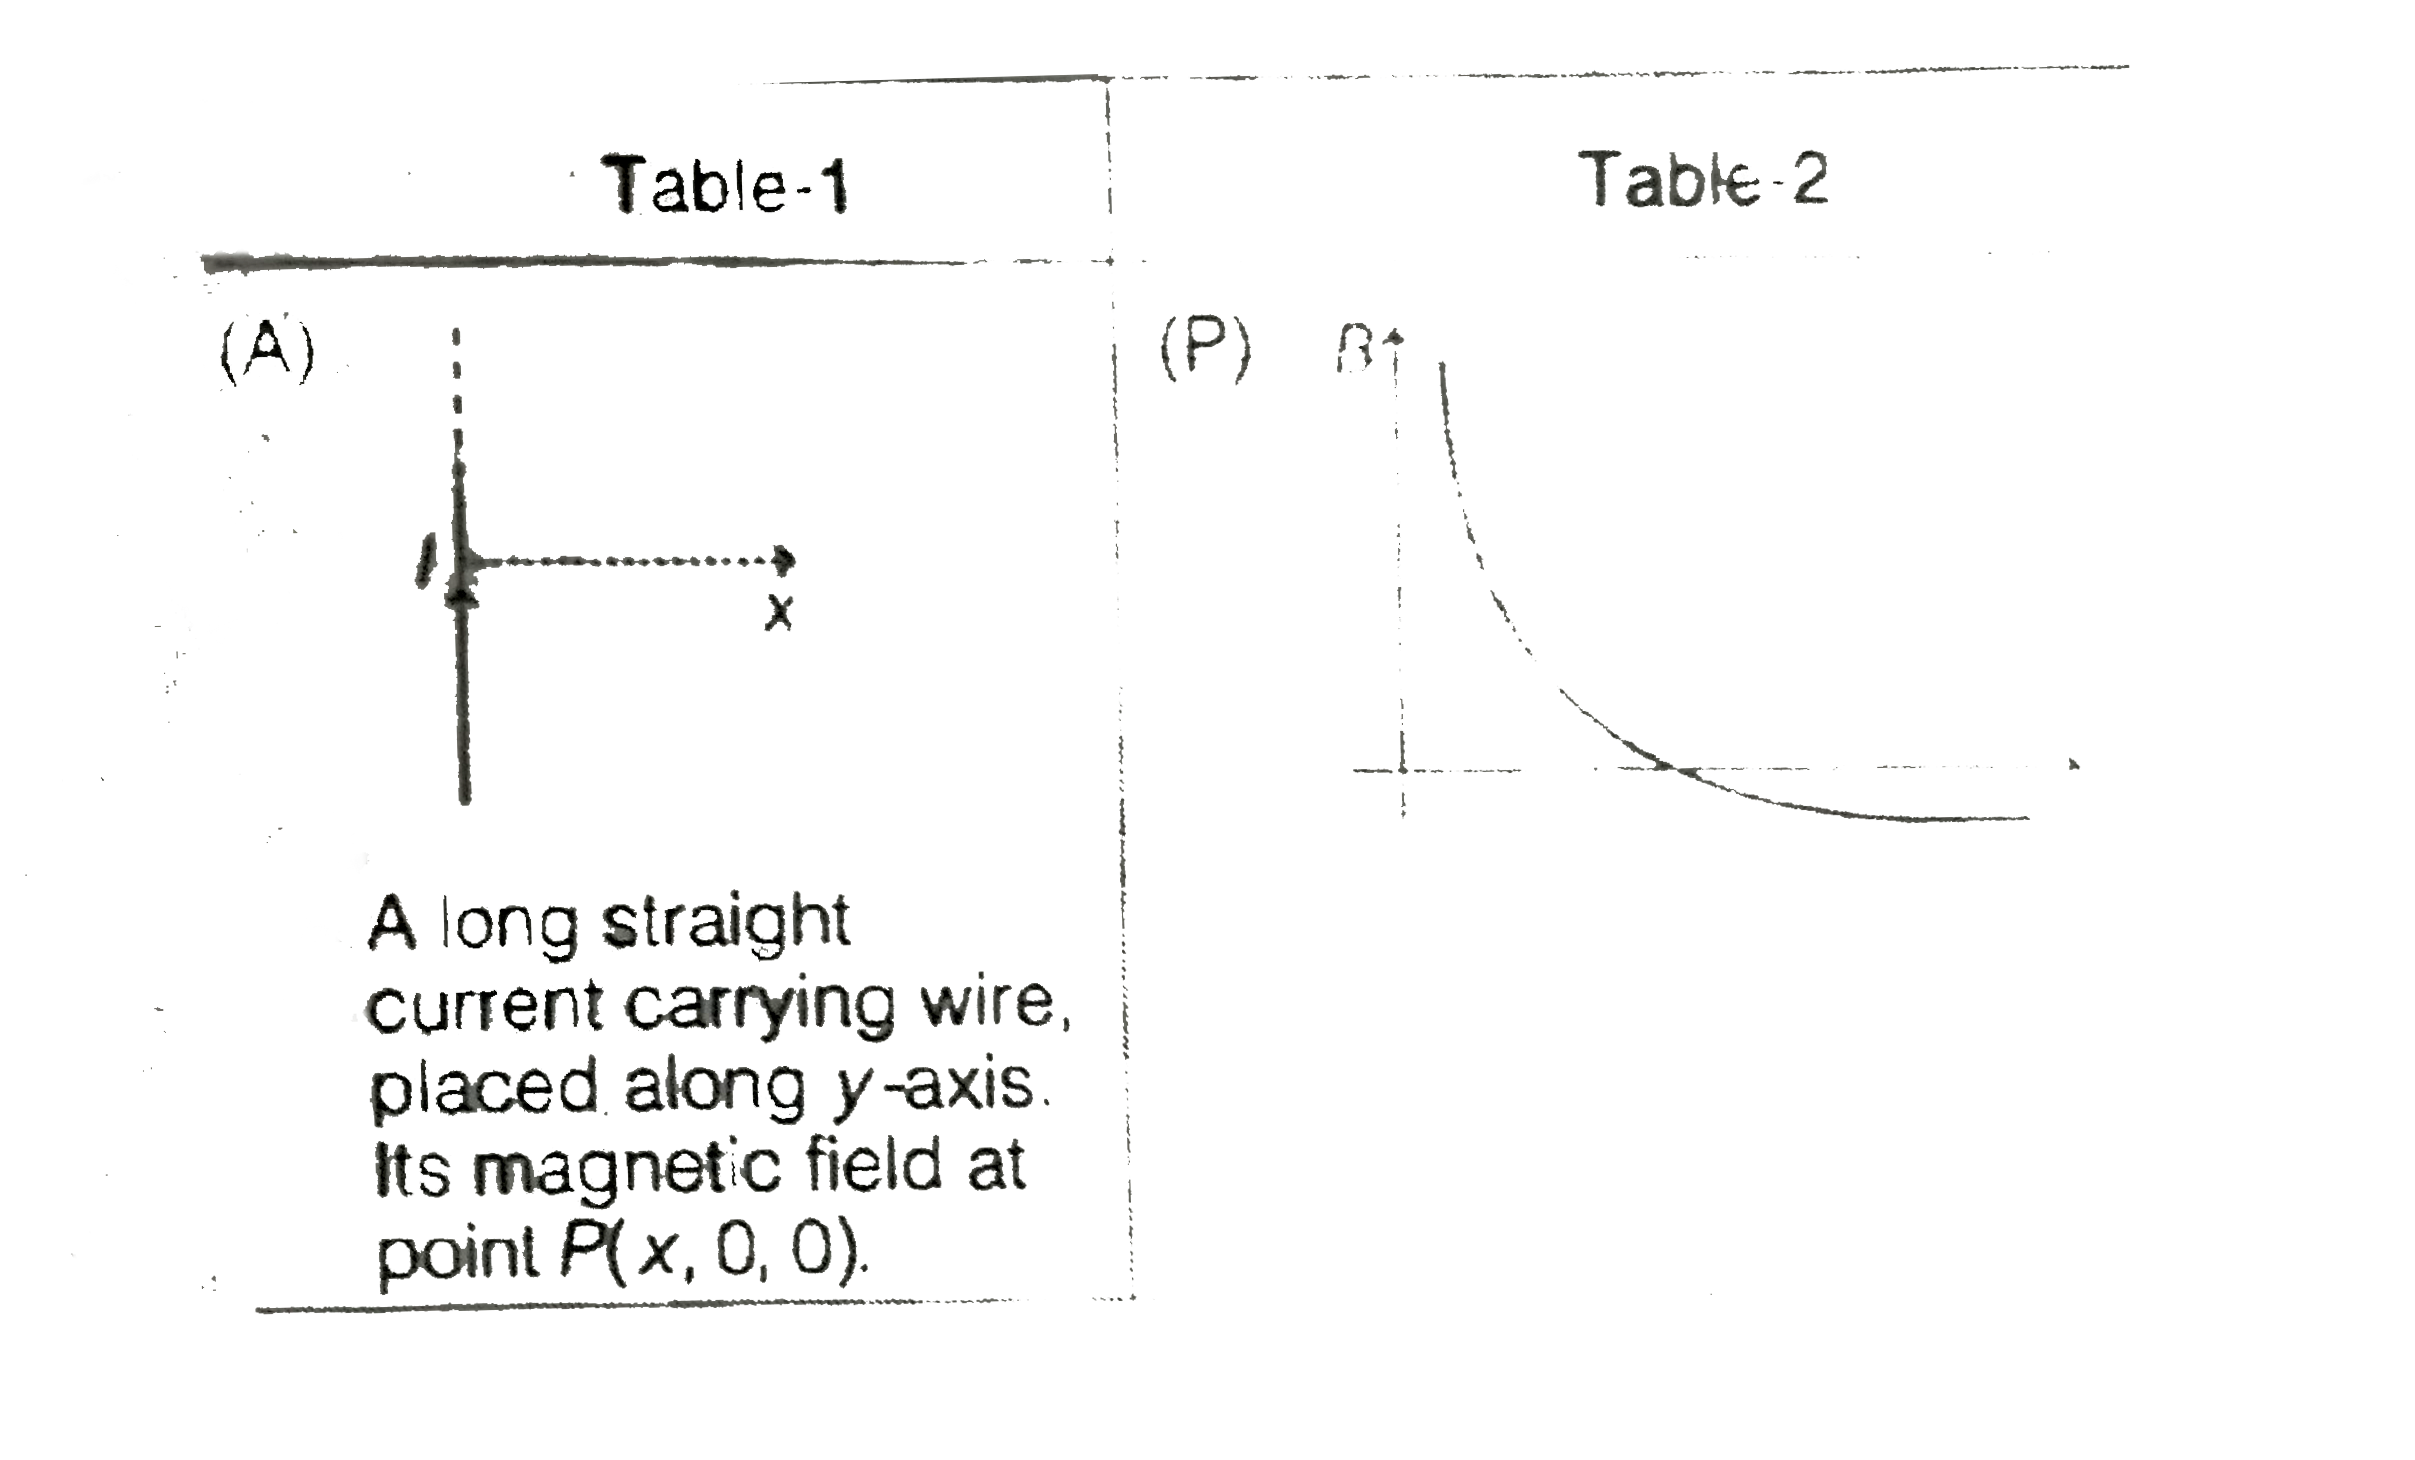 Some current carrying wires are given in Table-1 and graph of variation of magnetic field versus position of point P are given in Table-2. Match the graph given in Table-2 for the current carrying wire in Table-2.